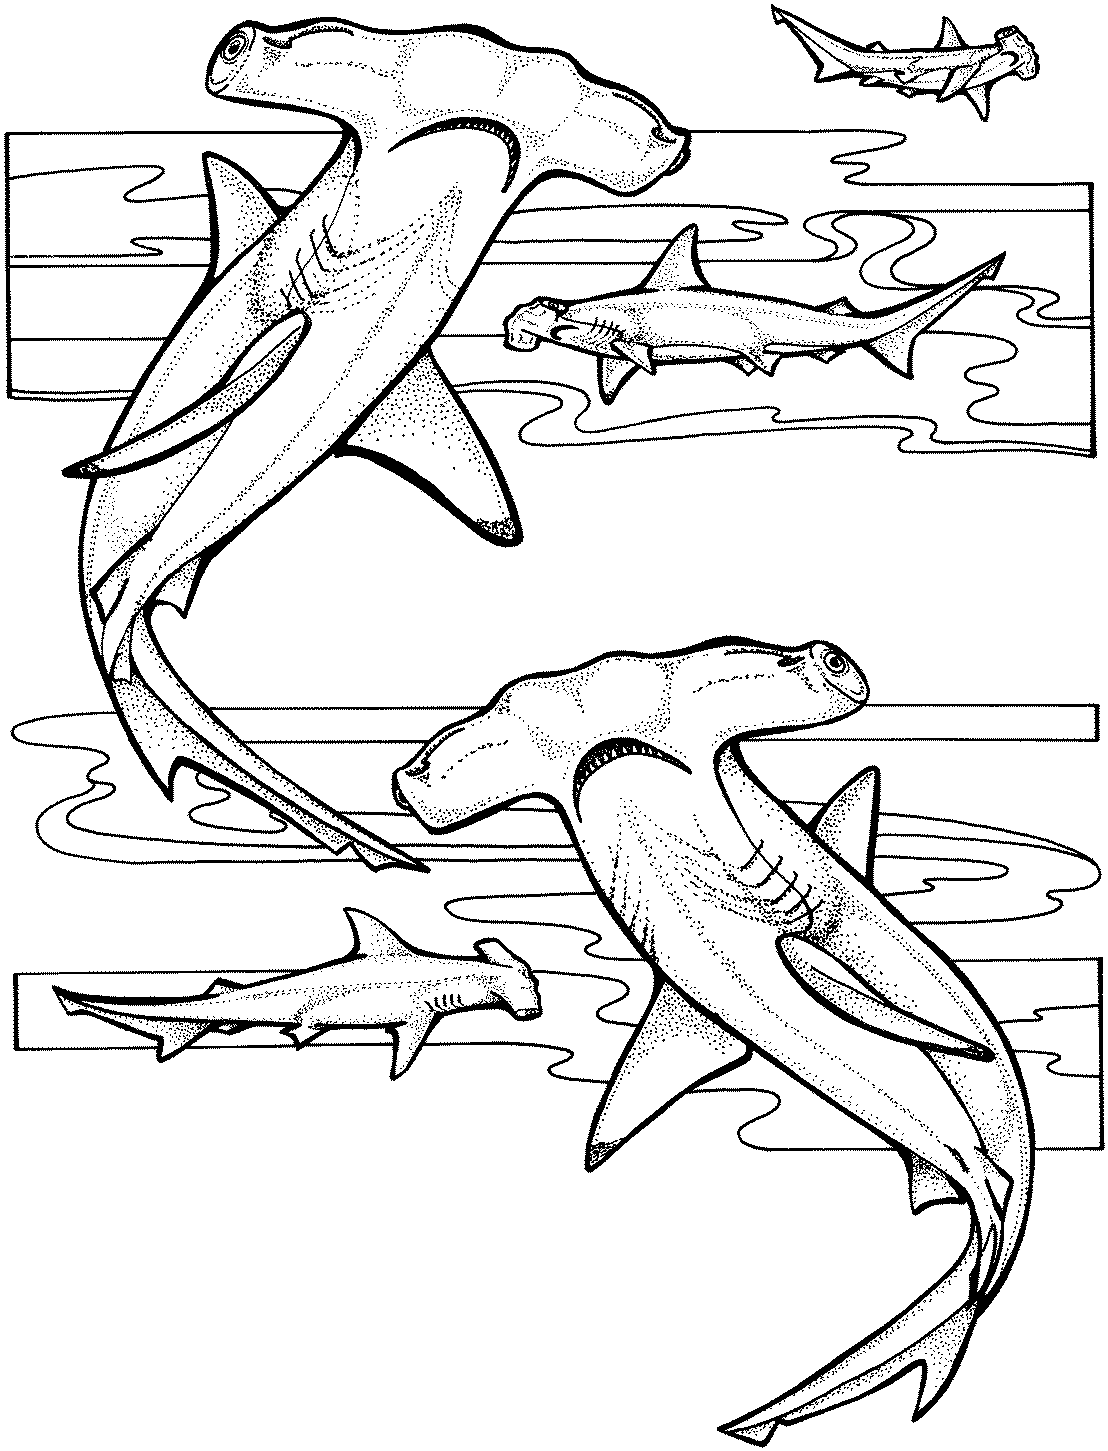 shark color pages free shark coloring pages pages color shark 